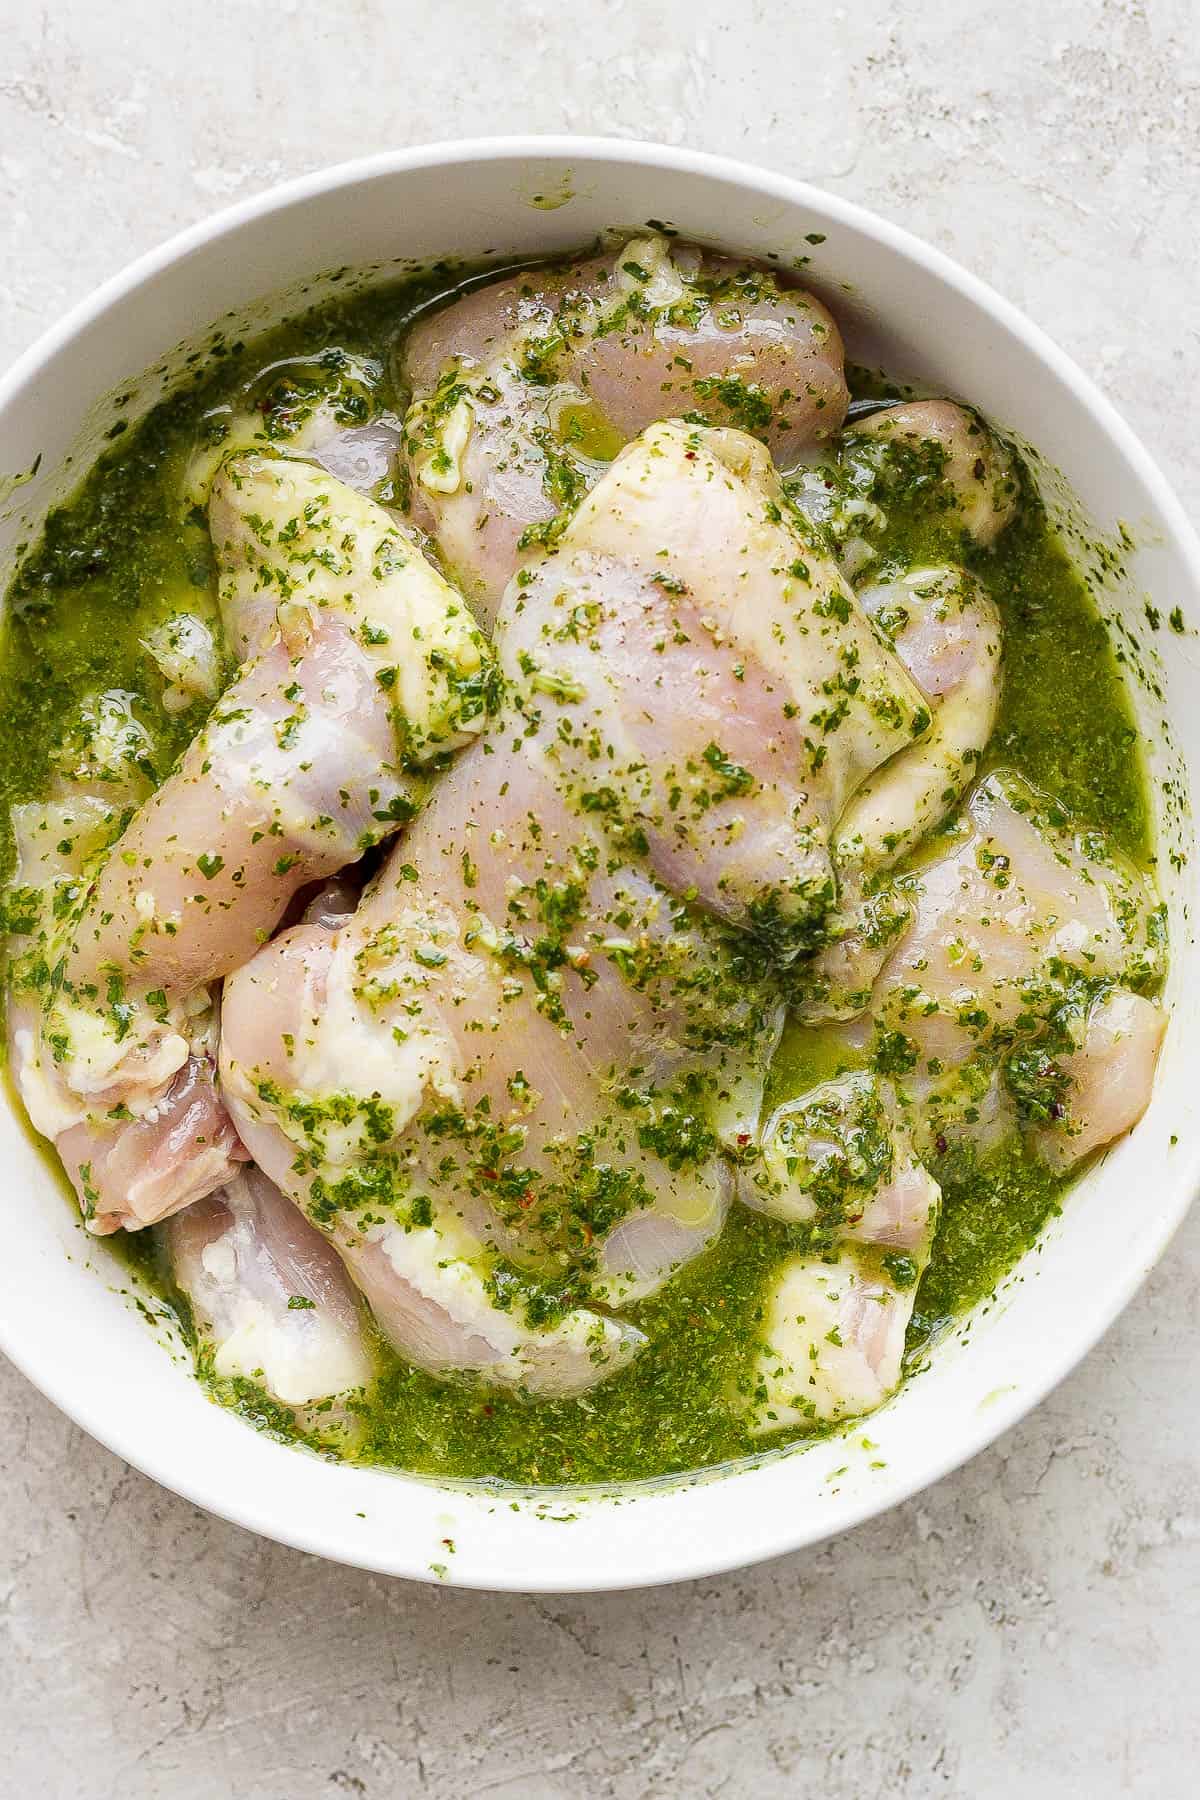 Chimichurri chicken in a bowl marinating in chimichurri sauce.